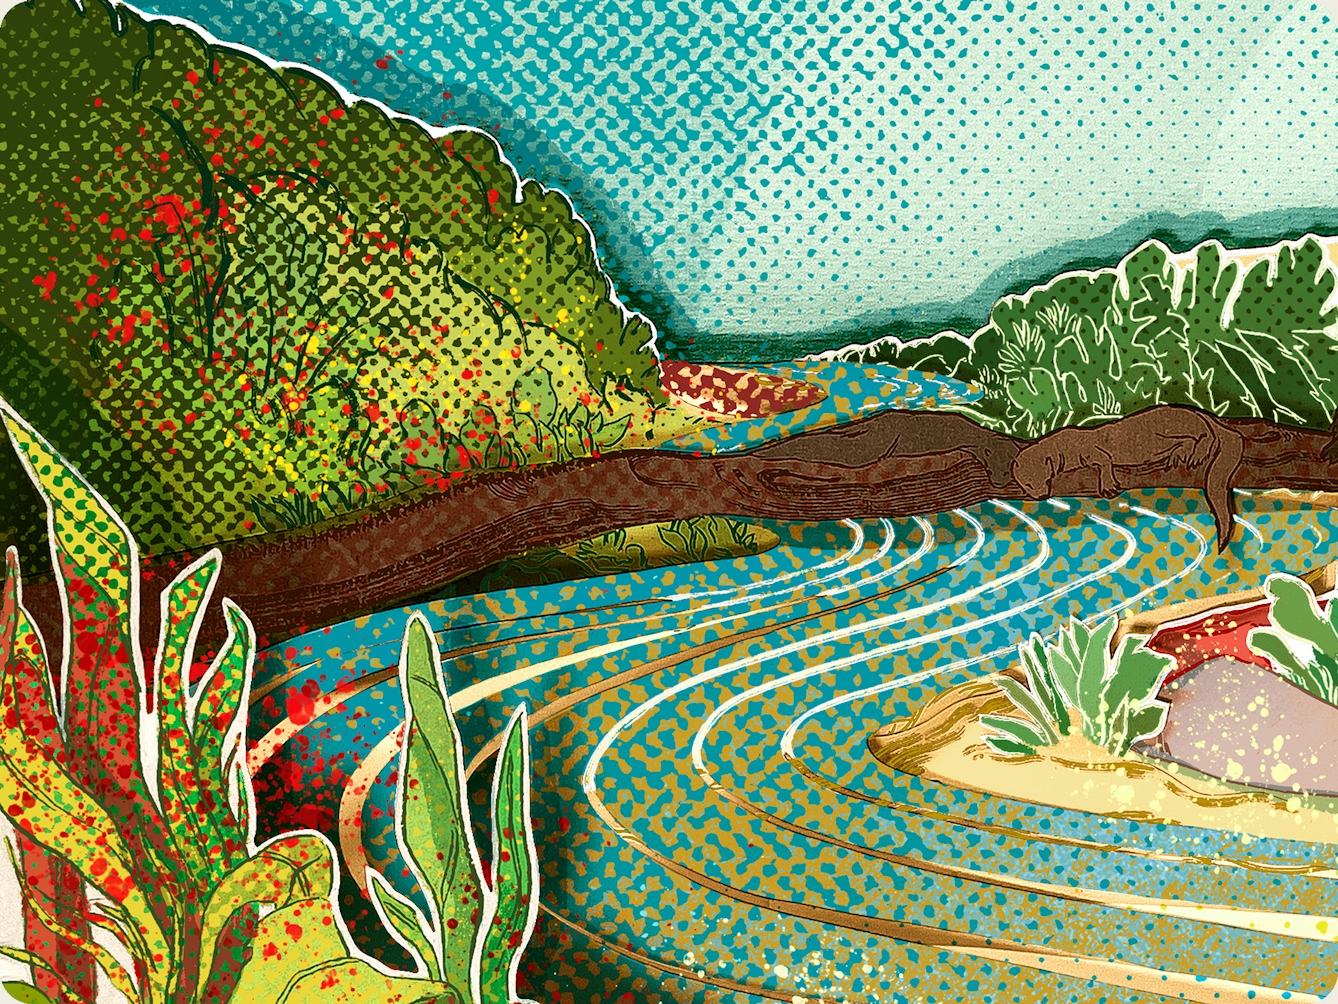 Photograph of a papercut 3D artwork. The image shows a meandering mottled blue and yellow river with white and gold brush strokes indicating the river’s curvature. Surrounding the different bends of the river are plants and shrubbery of various shades of green with red and yellow paint splatters. A tree branch is outstretched across the river. Two otters lie resting on top of the branch. 
